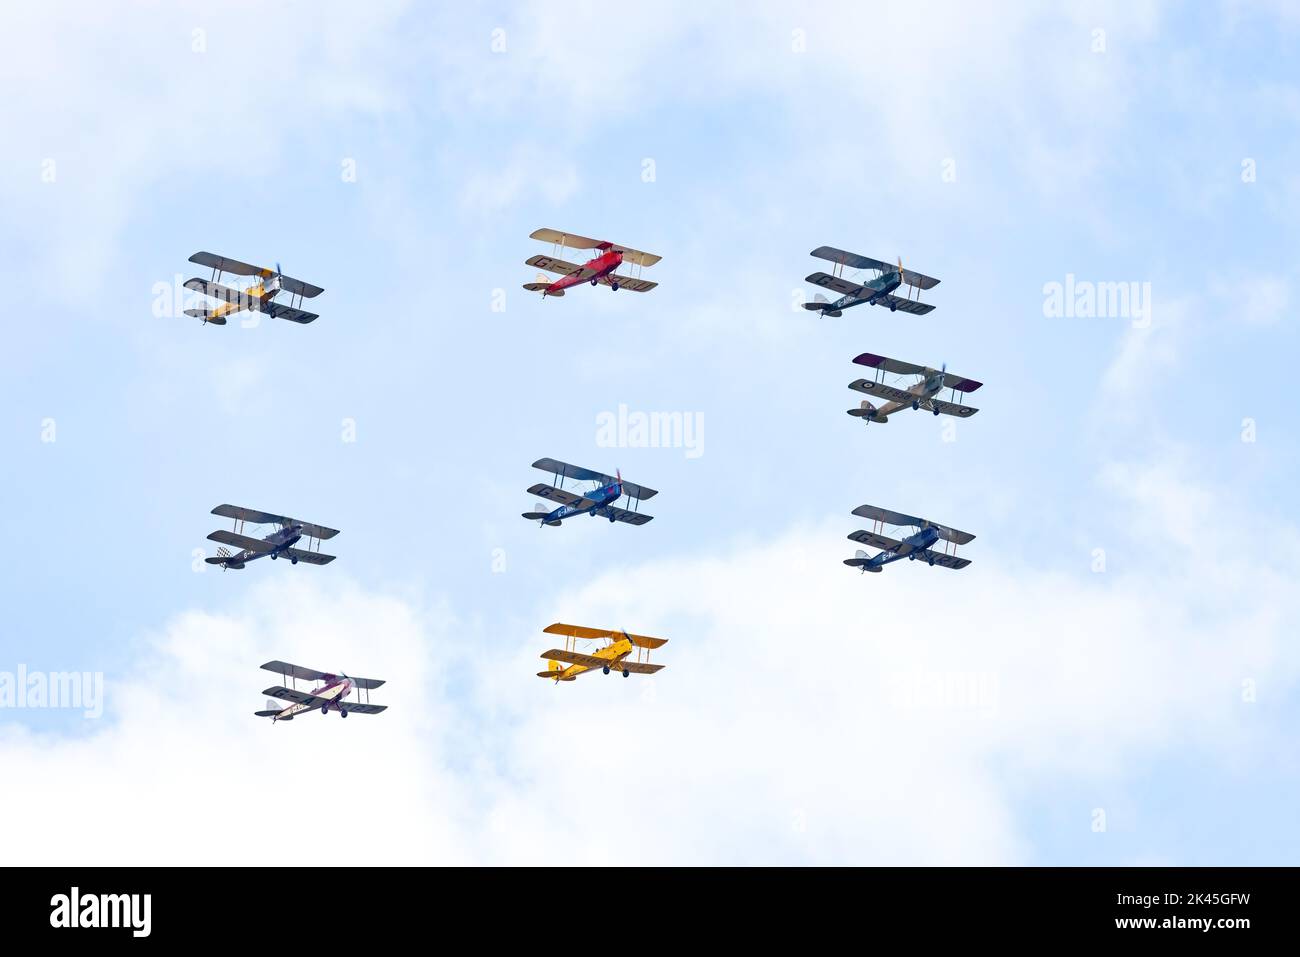 Tiger 9 Aeronautical Display Team, using de Havilland DH82A planes, aka The Tiger Moth, flying over the Imperial War Museum Duxford, 2022 airshow Stock Photo